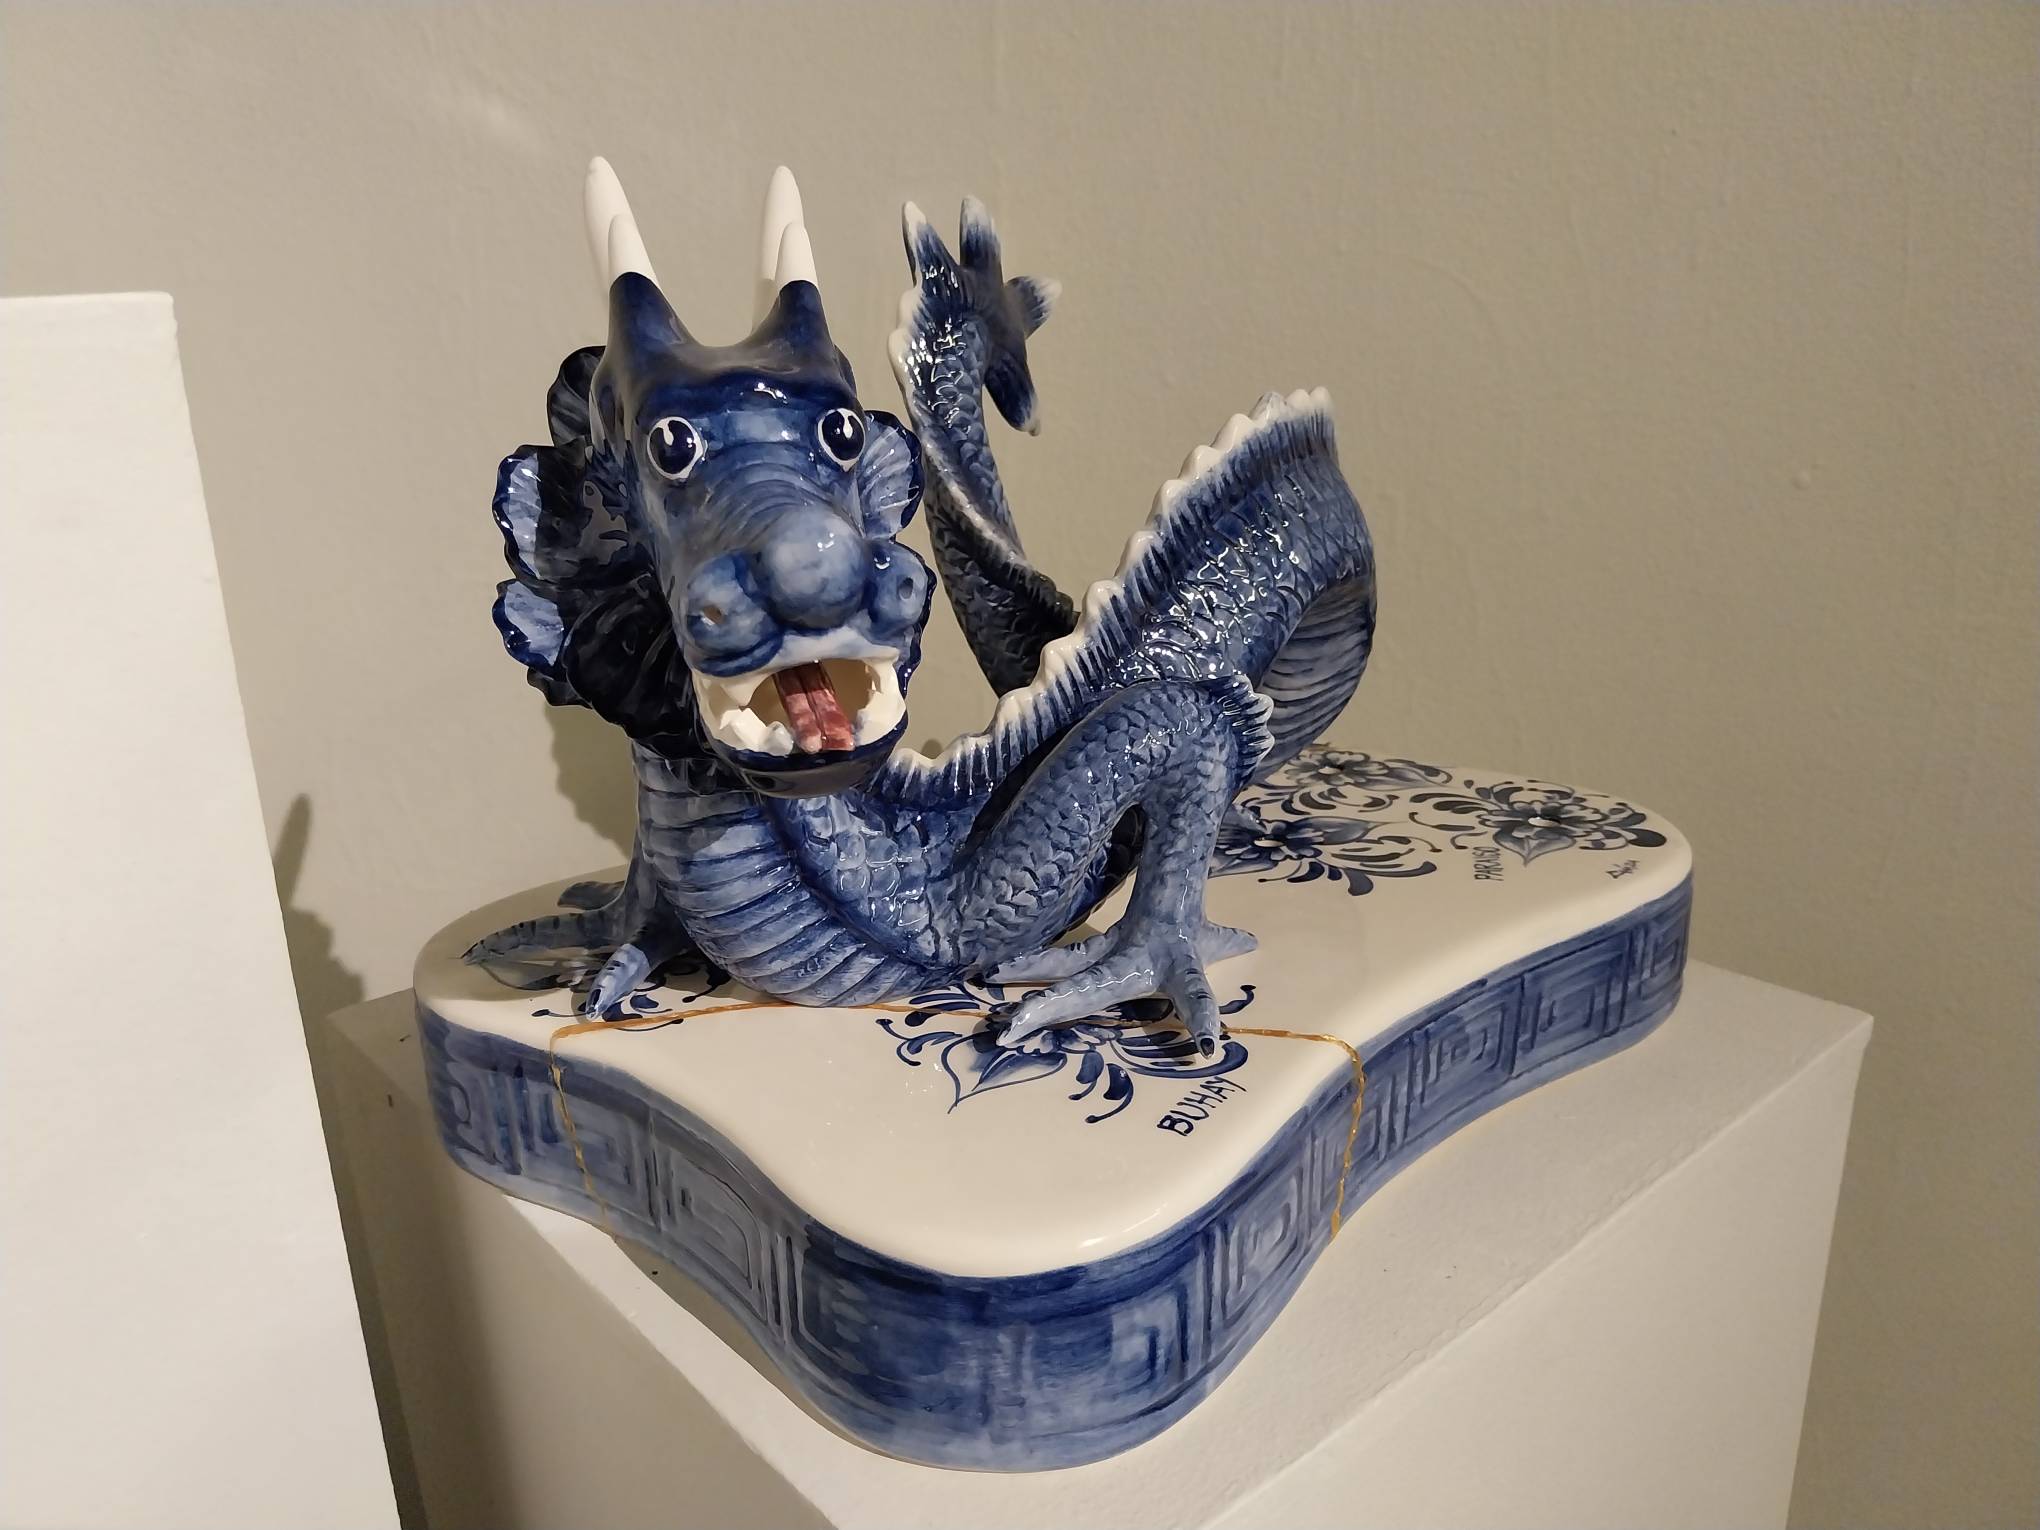 One of the dragon works shown in the exhibit. Photo by Elle Yap.